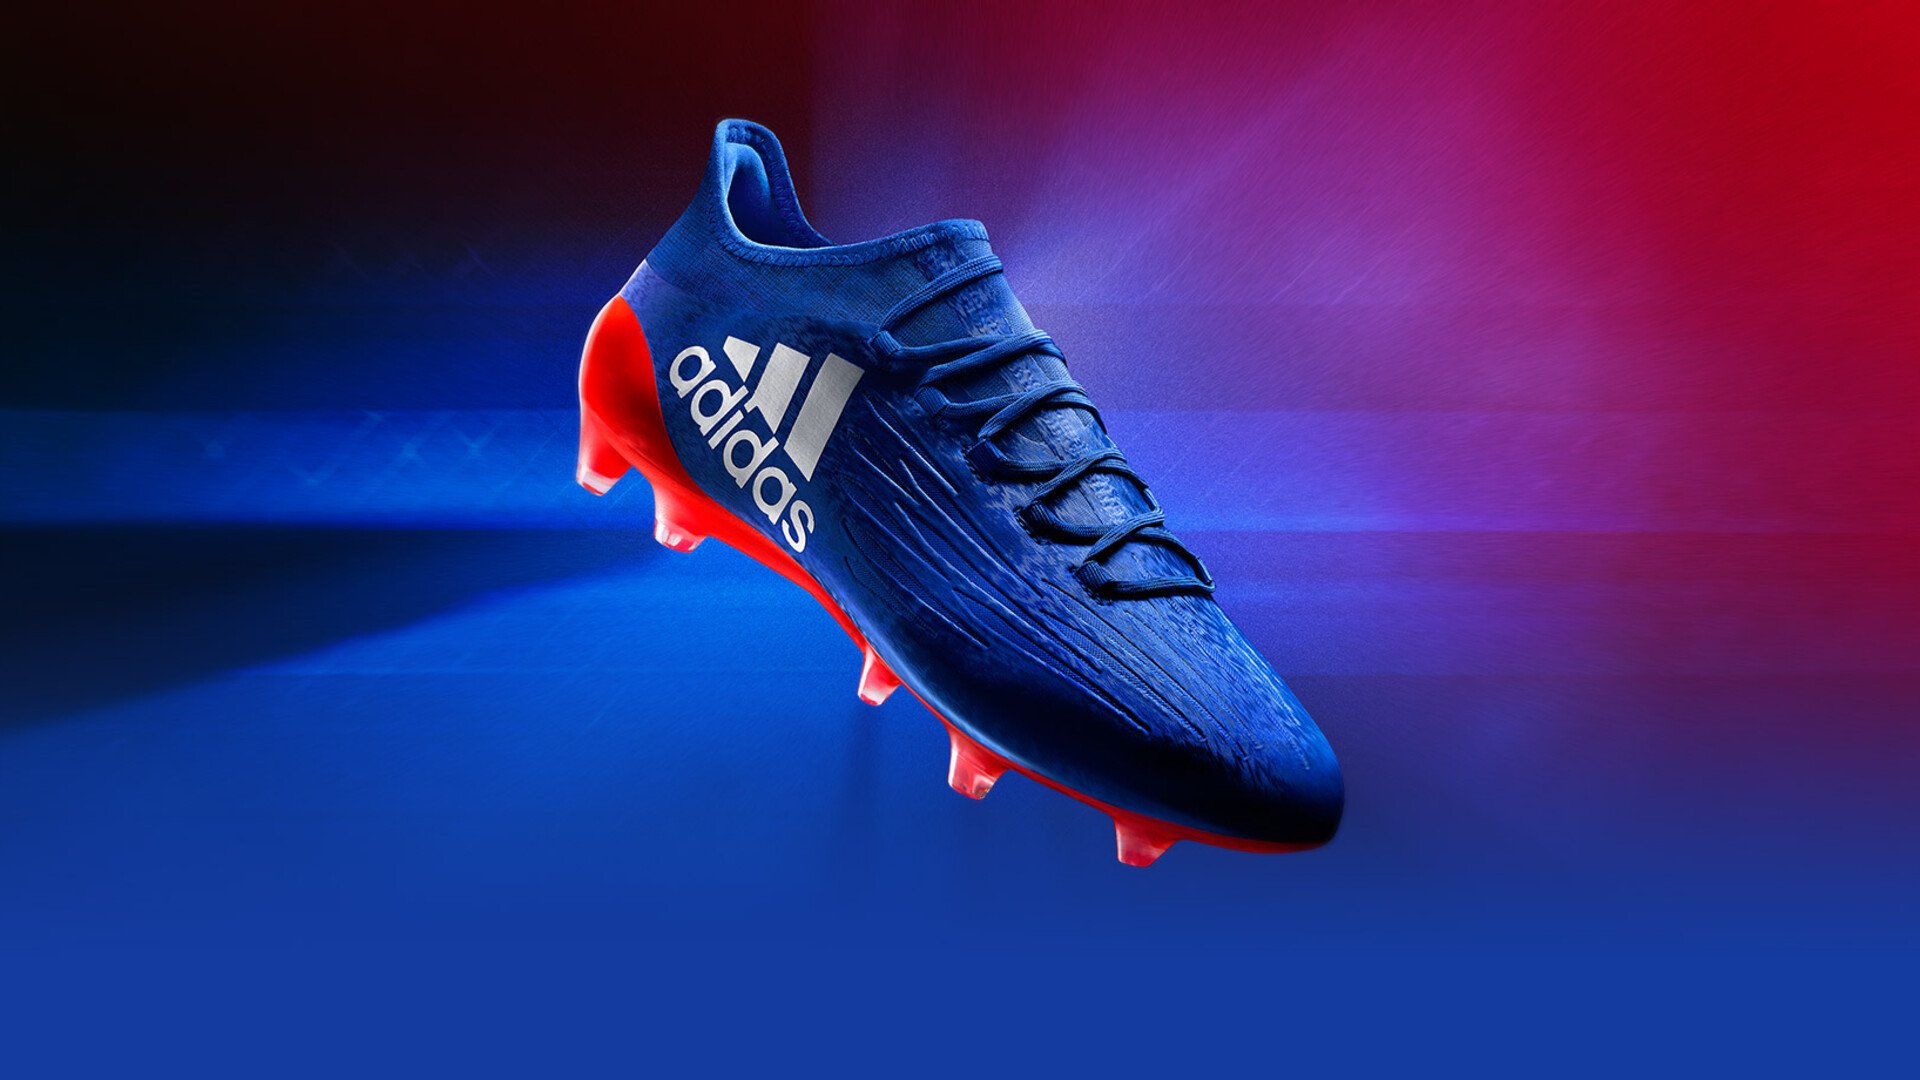 INTERSPORT adidas x16 | Performance Campaign | elements.at